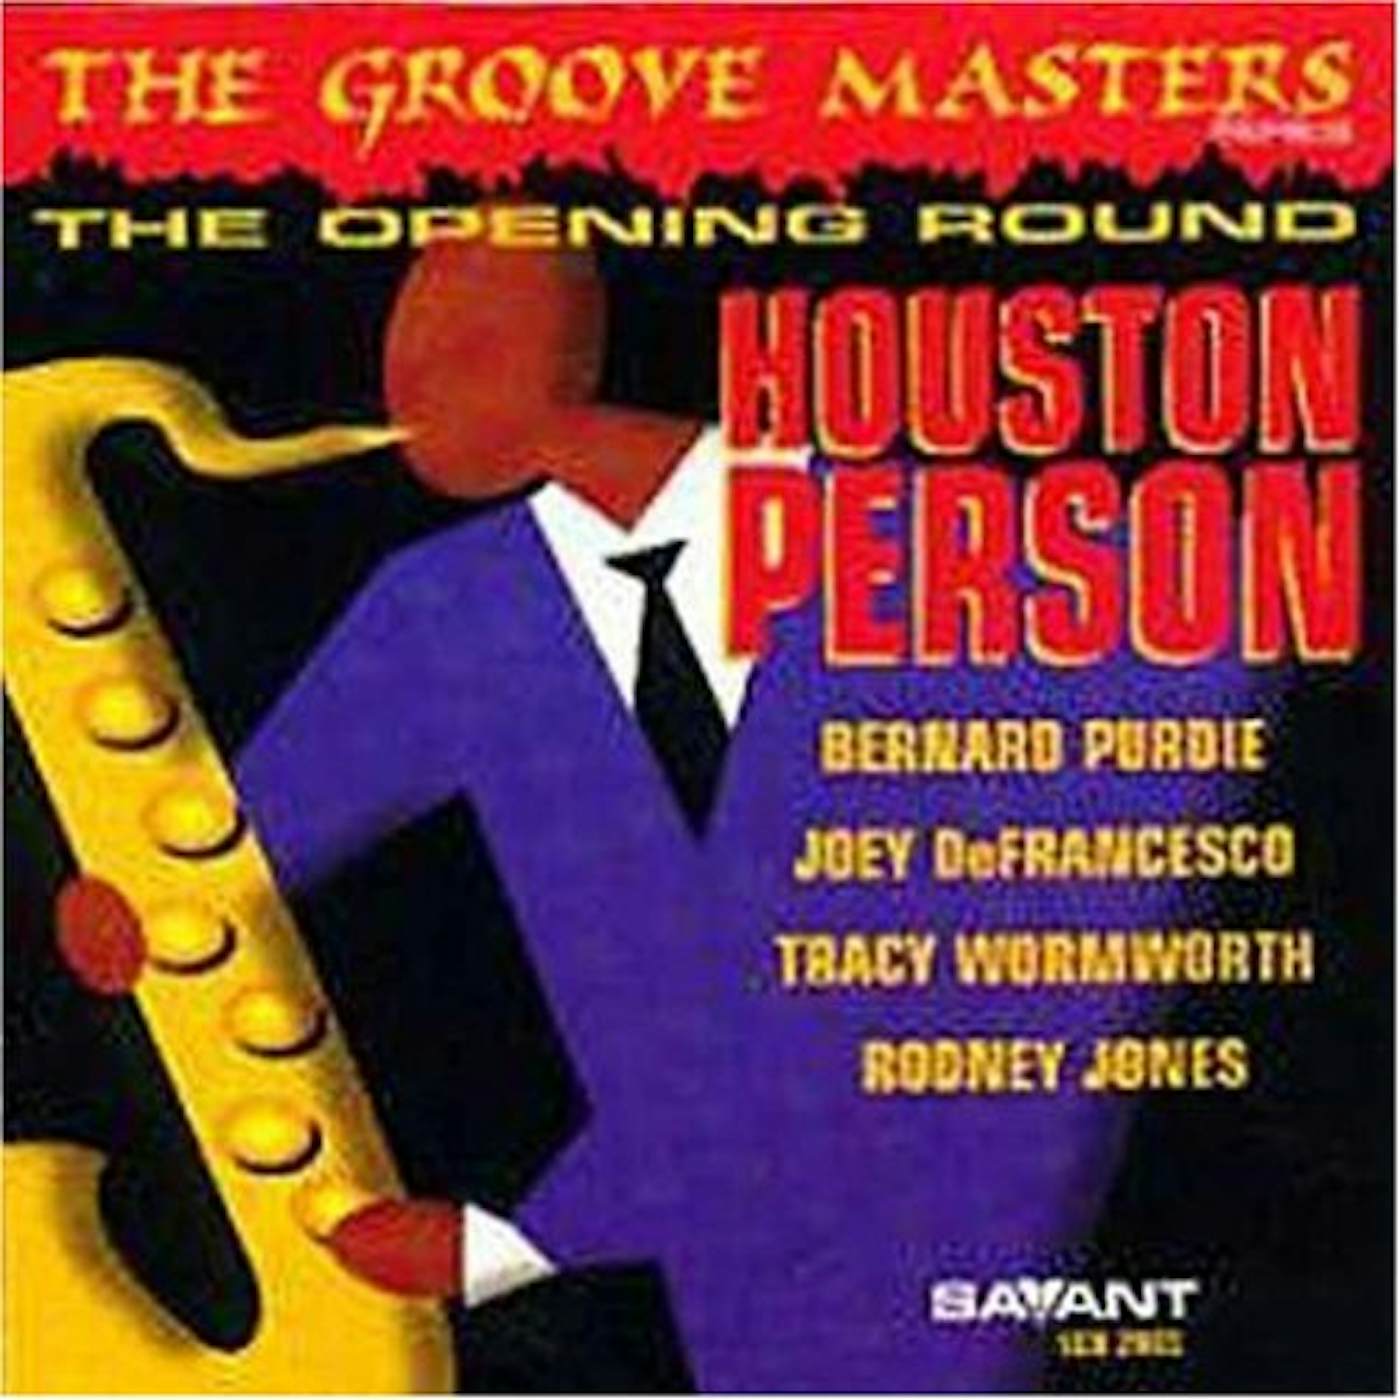 Houston Person OPENING ROUND: GROOVE MASTERS SERIES 1 CD